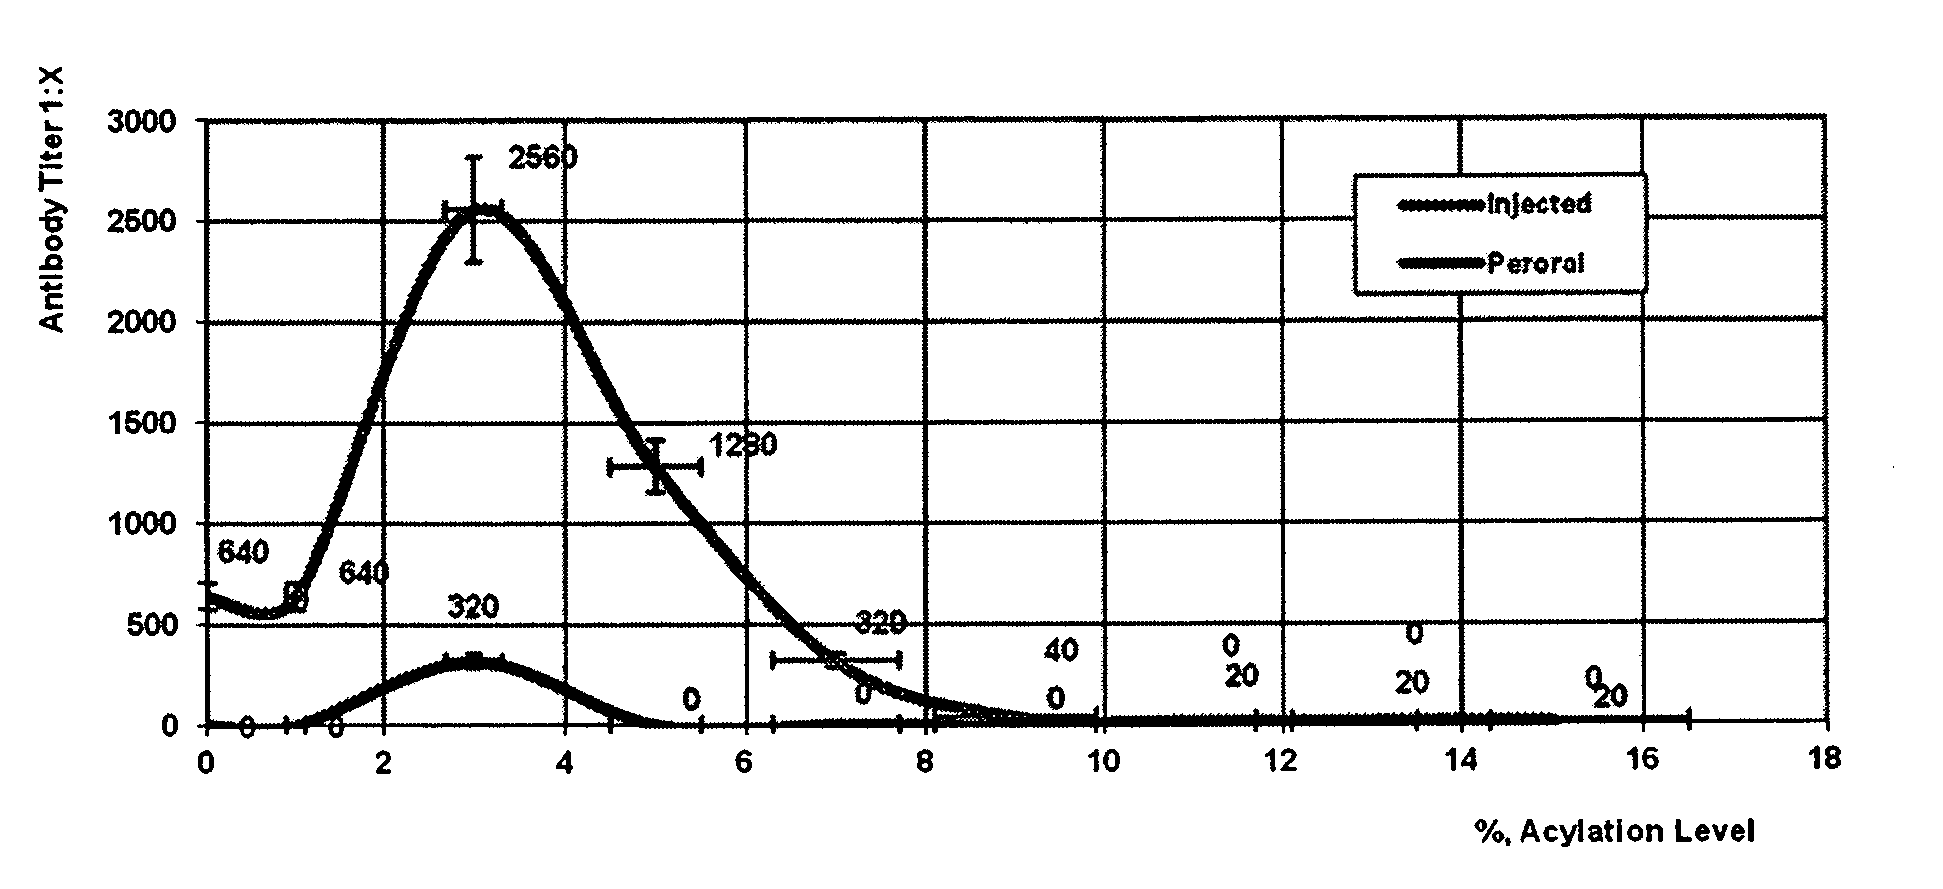 Vaccines with increased immunogenicity and methods for obtaining them